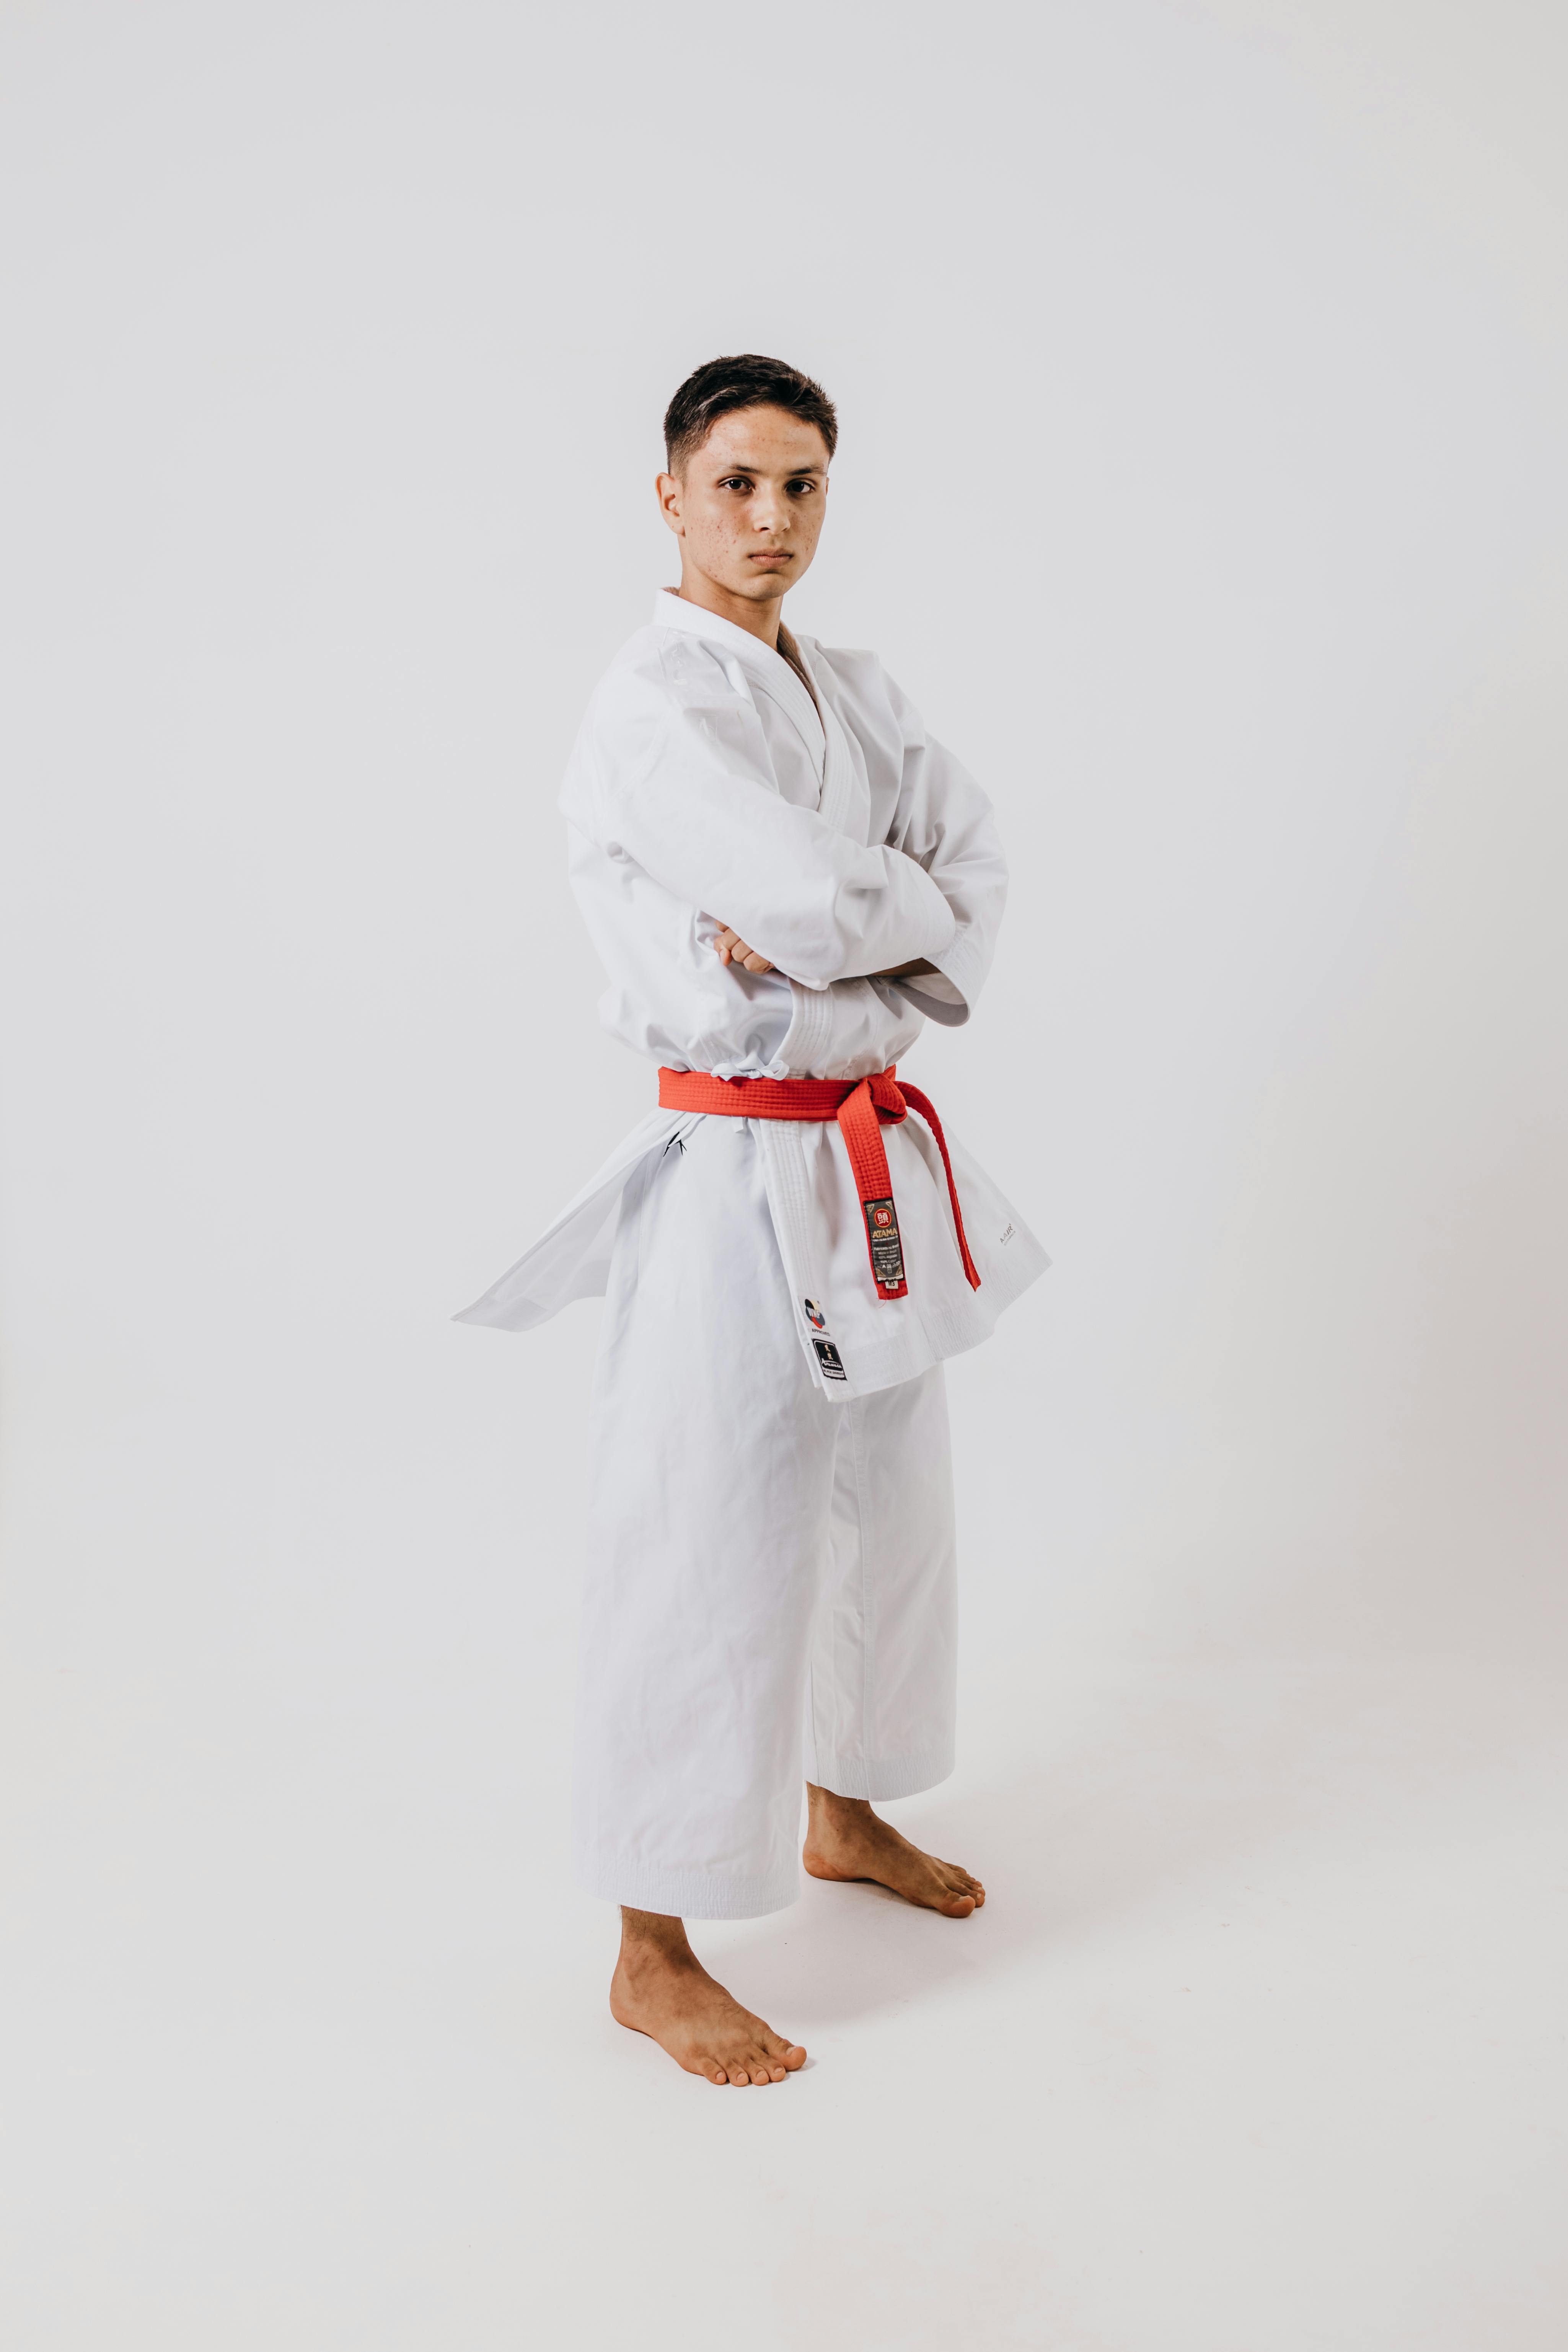 The Ultimate Guide to Karate Training: Exercises and Fitness Regime | by  SFA Play | Medium